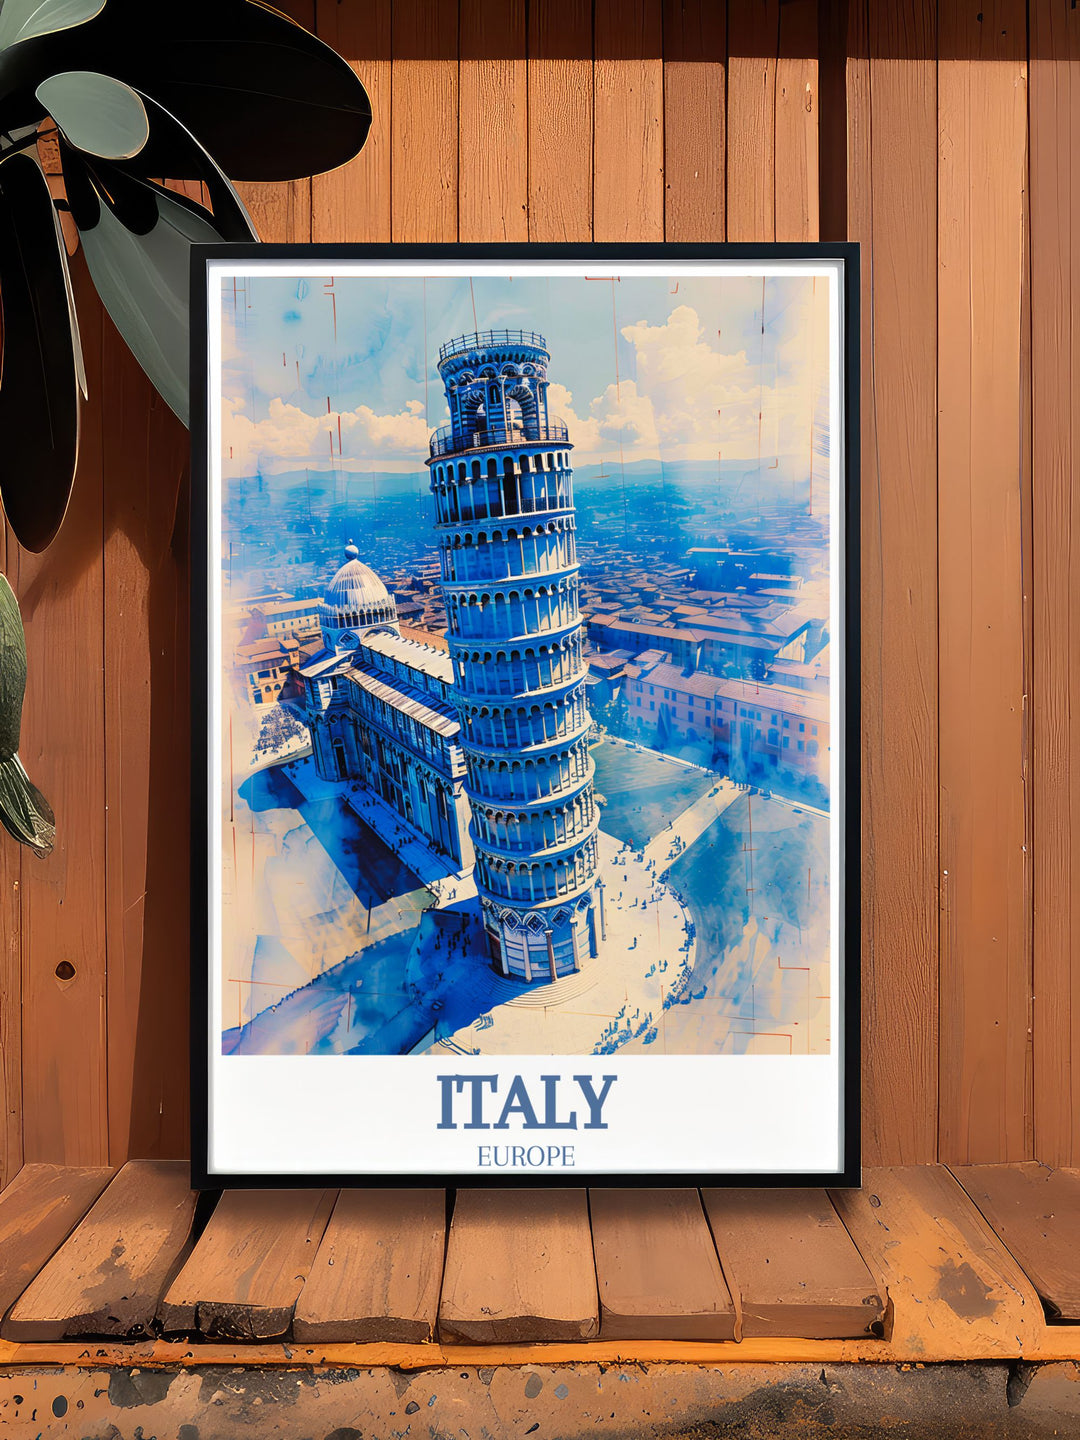 This art print showcases the Leaning Tower of Pisa and Pisa Cathedral, bringing the timeless beauty and cultural significance of these landmarks into your home.